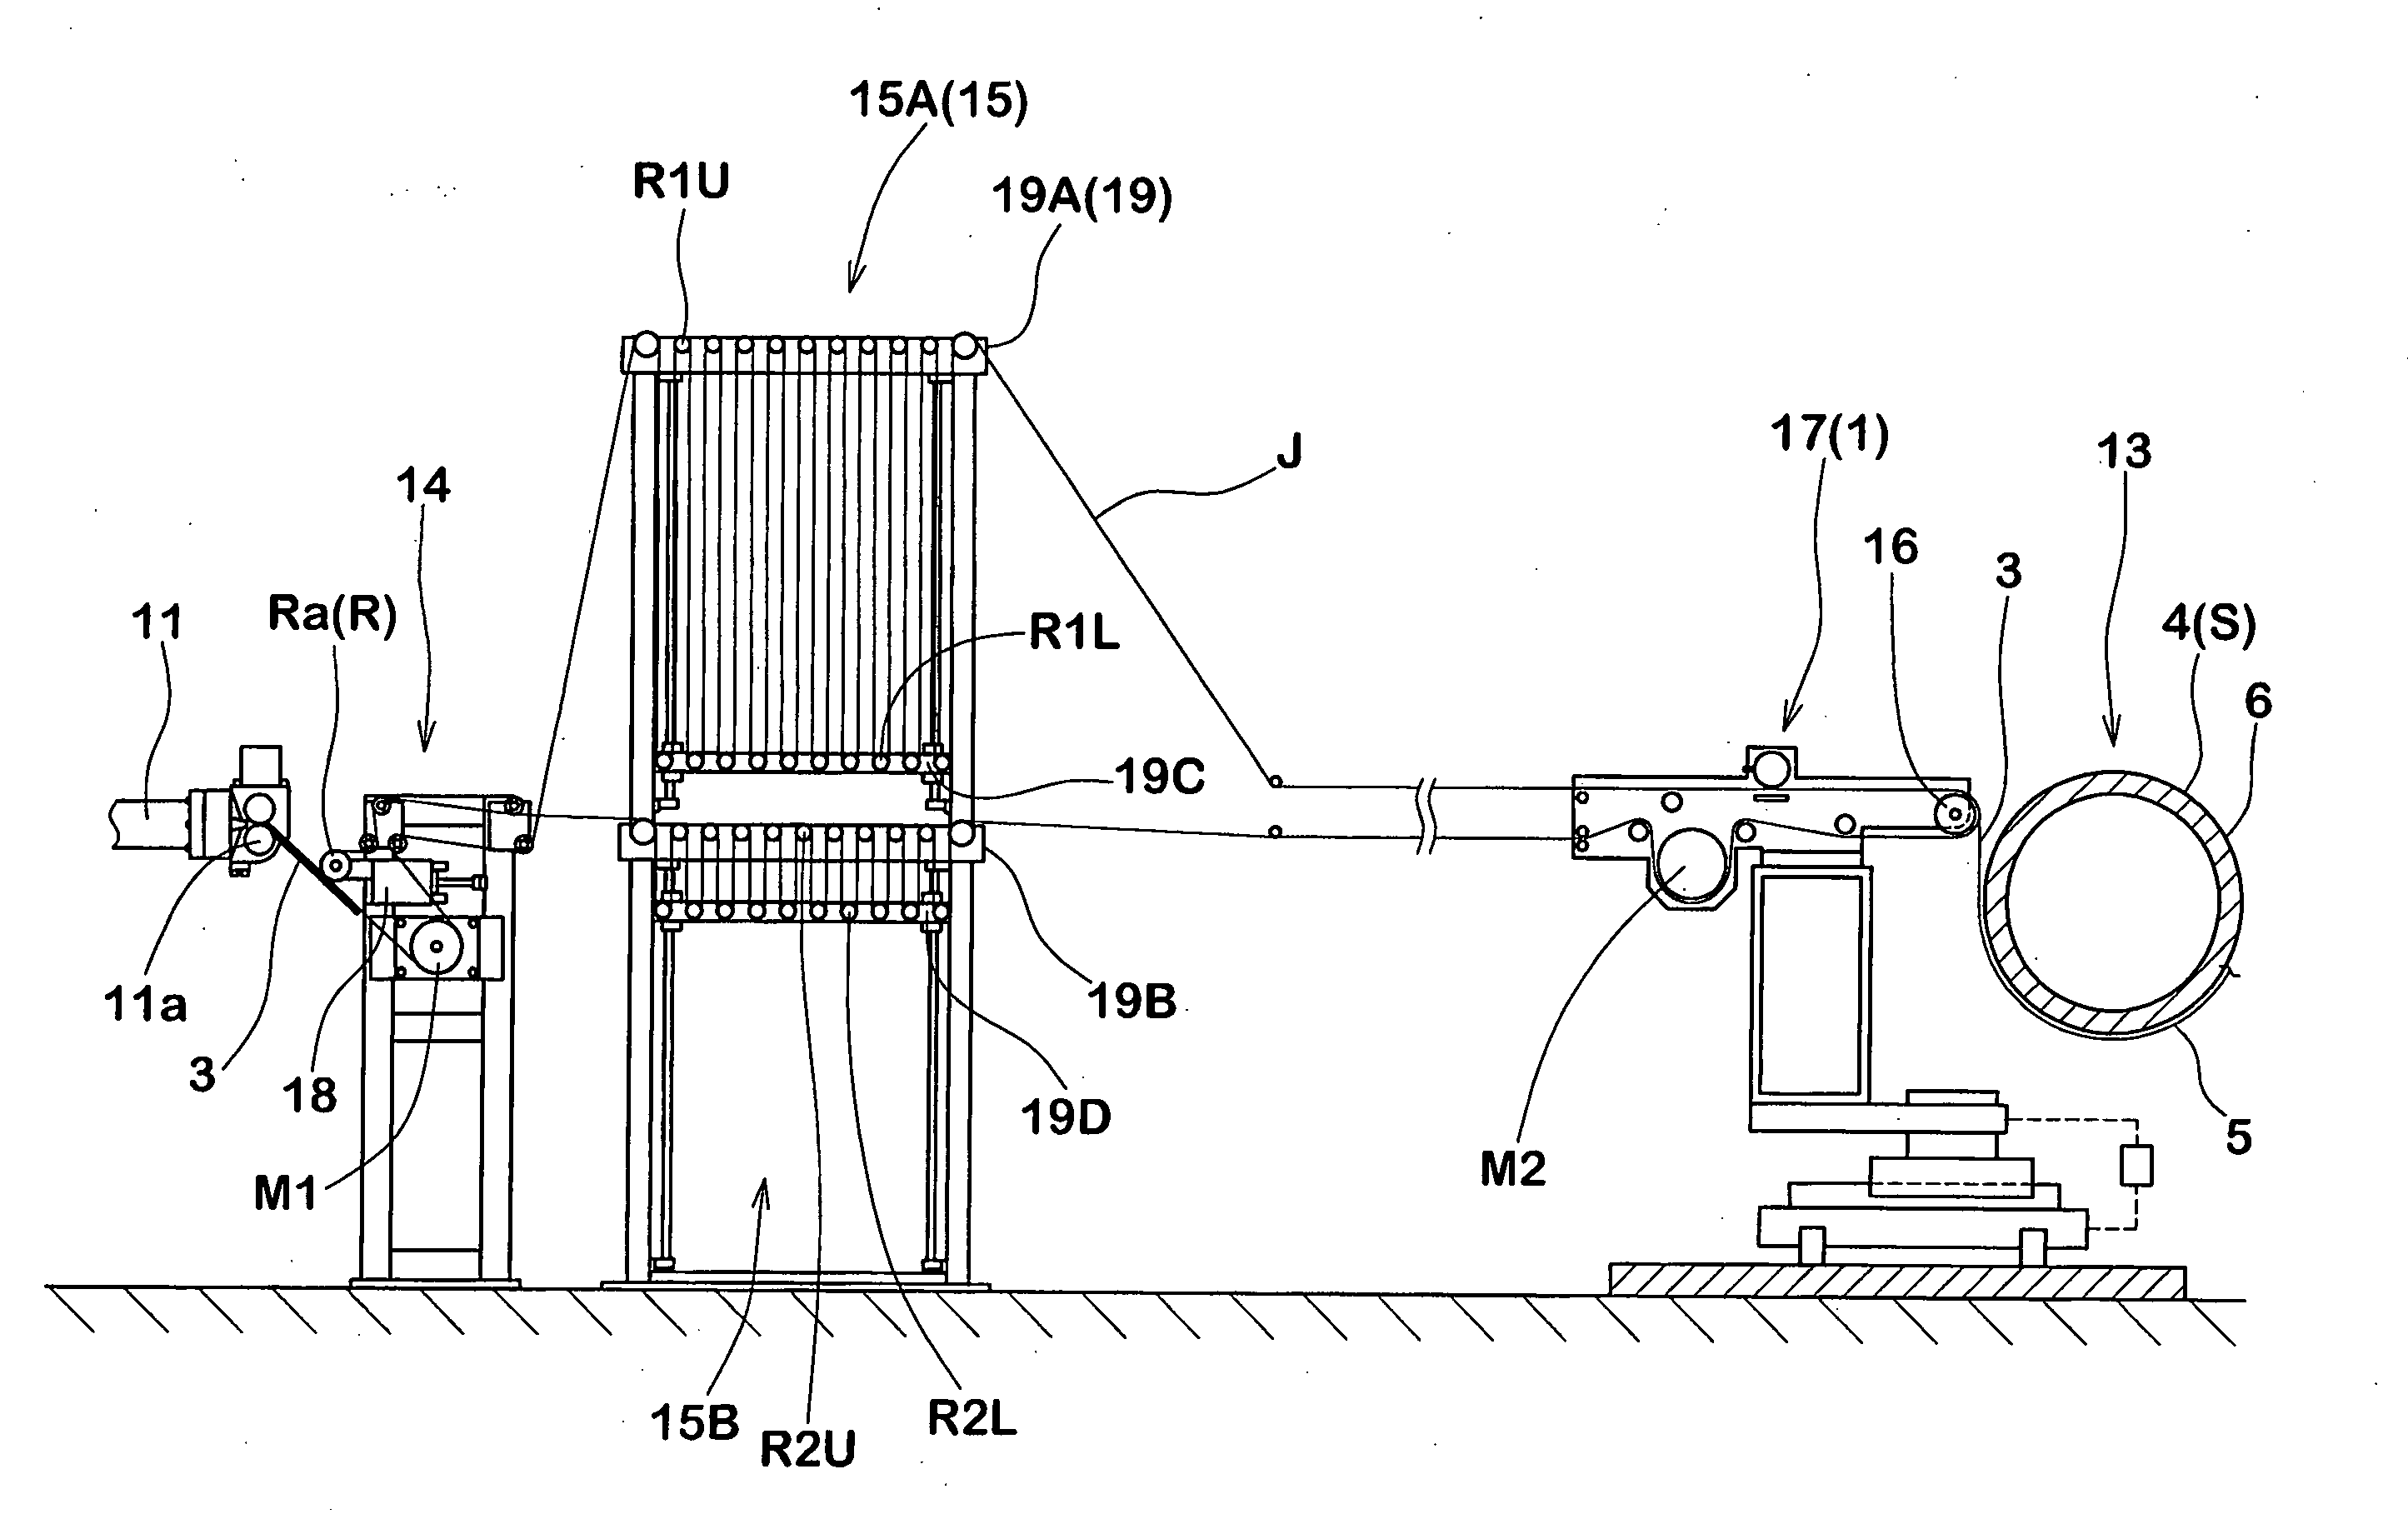 Producing method of rubber strip winding body, and rubber strip winding apparatus